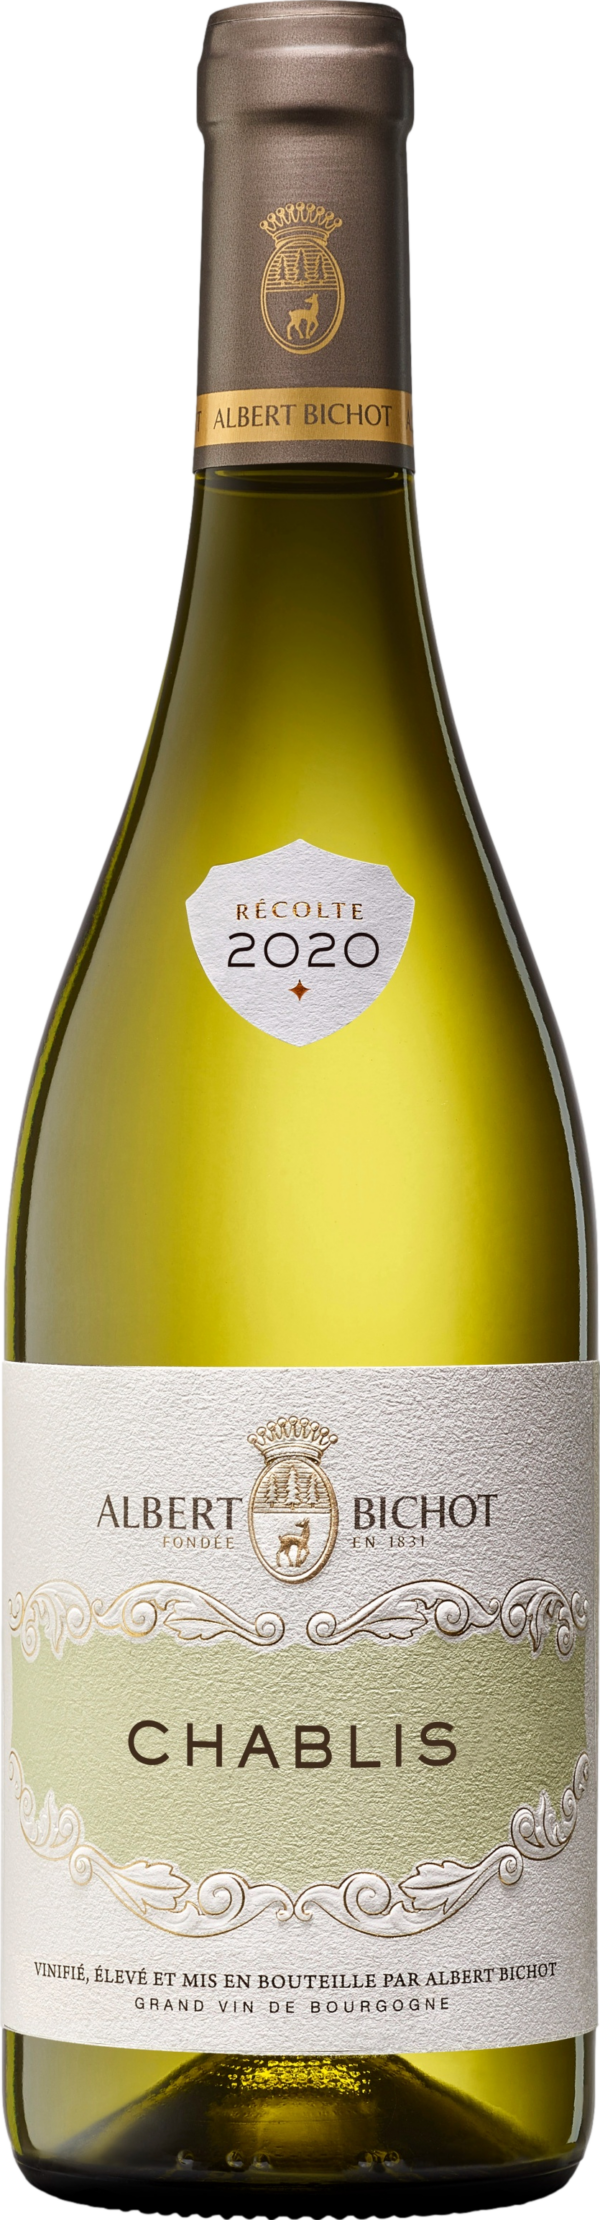 Product image of Albert Bichot Chablis 2020 from 8wines